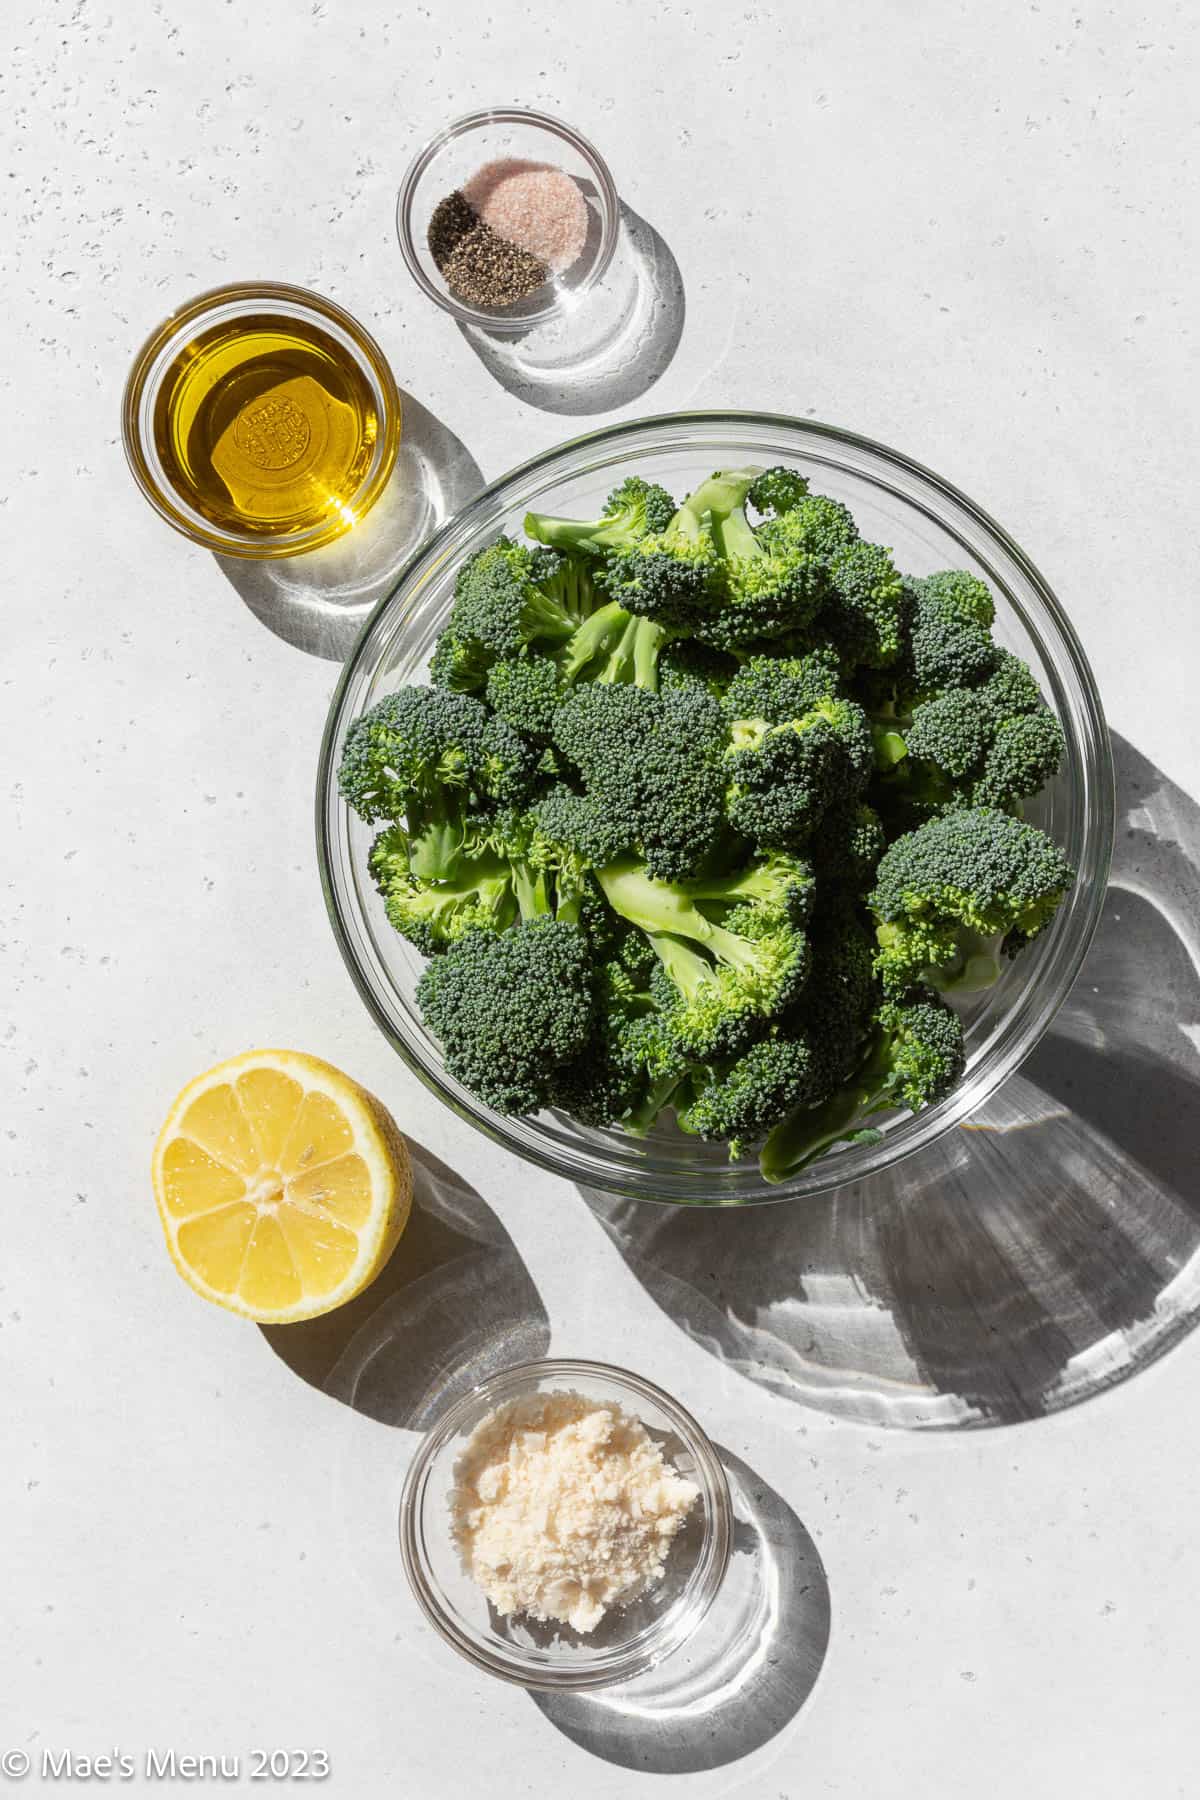 All of the ingredients for roasted broccoli on the counter.